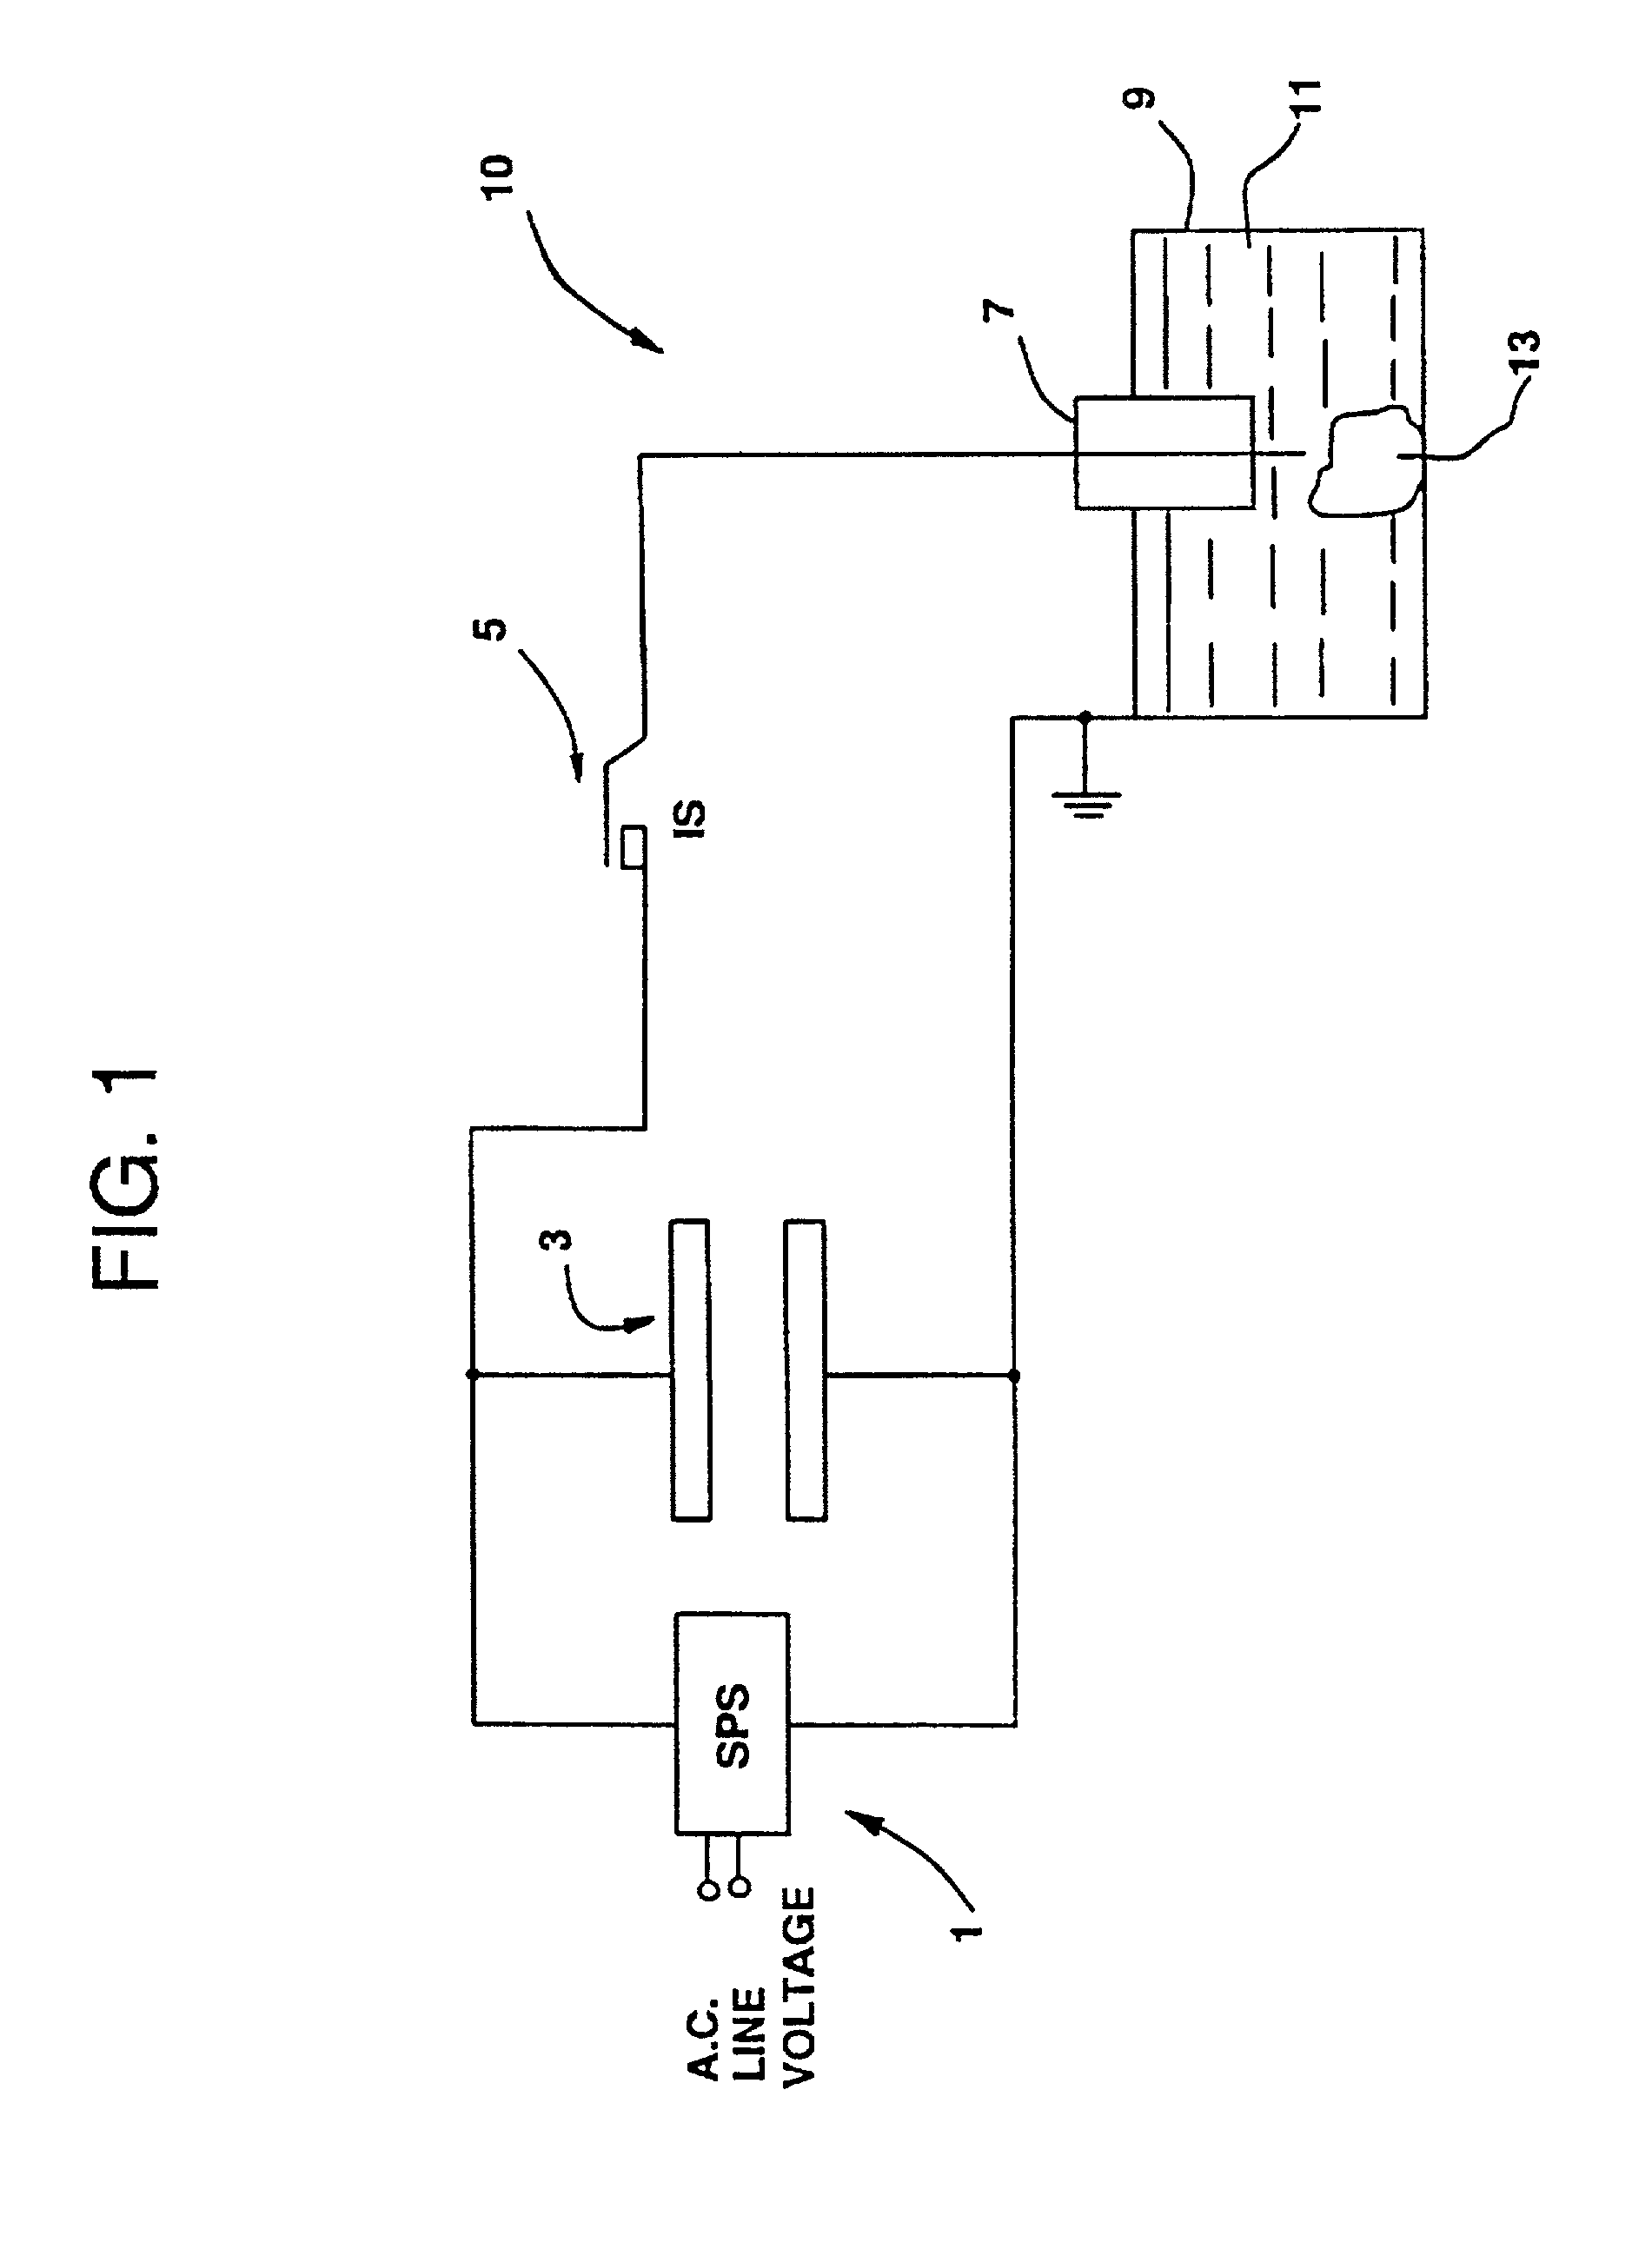 Method and apparatus for extracting hydrocarbons from tar sands using electro plasma